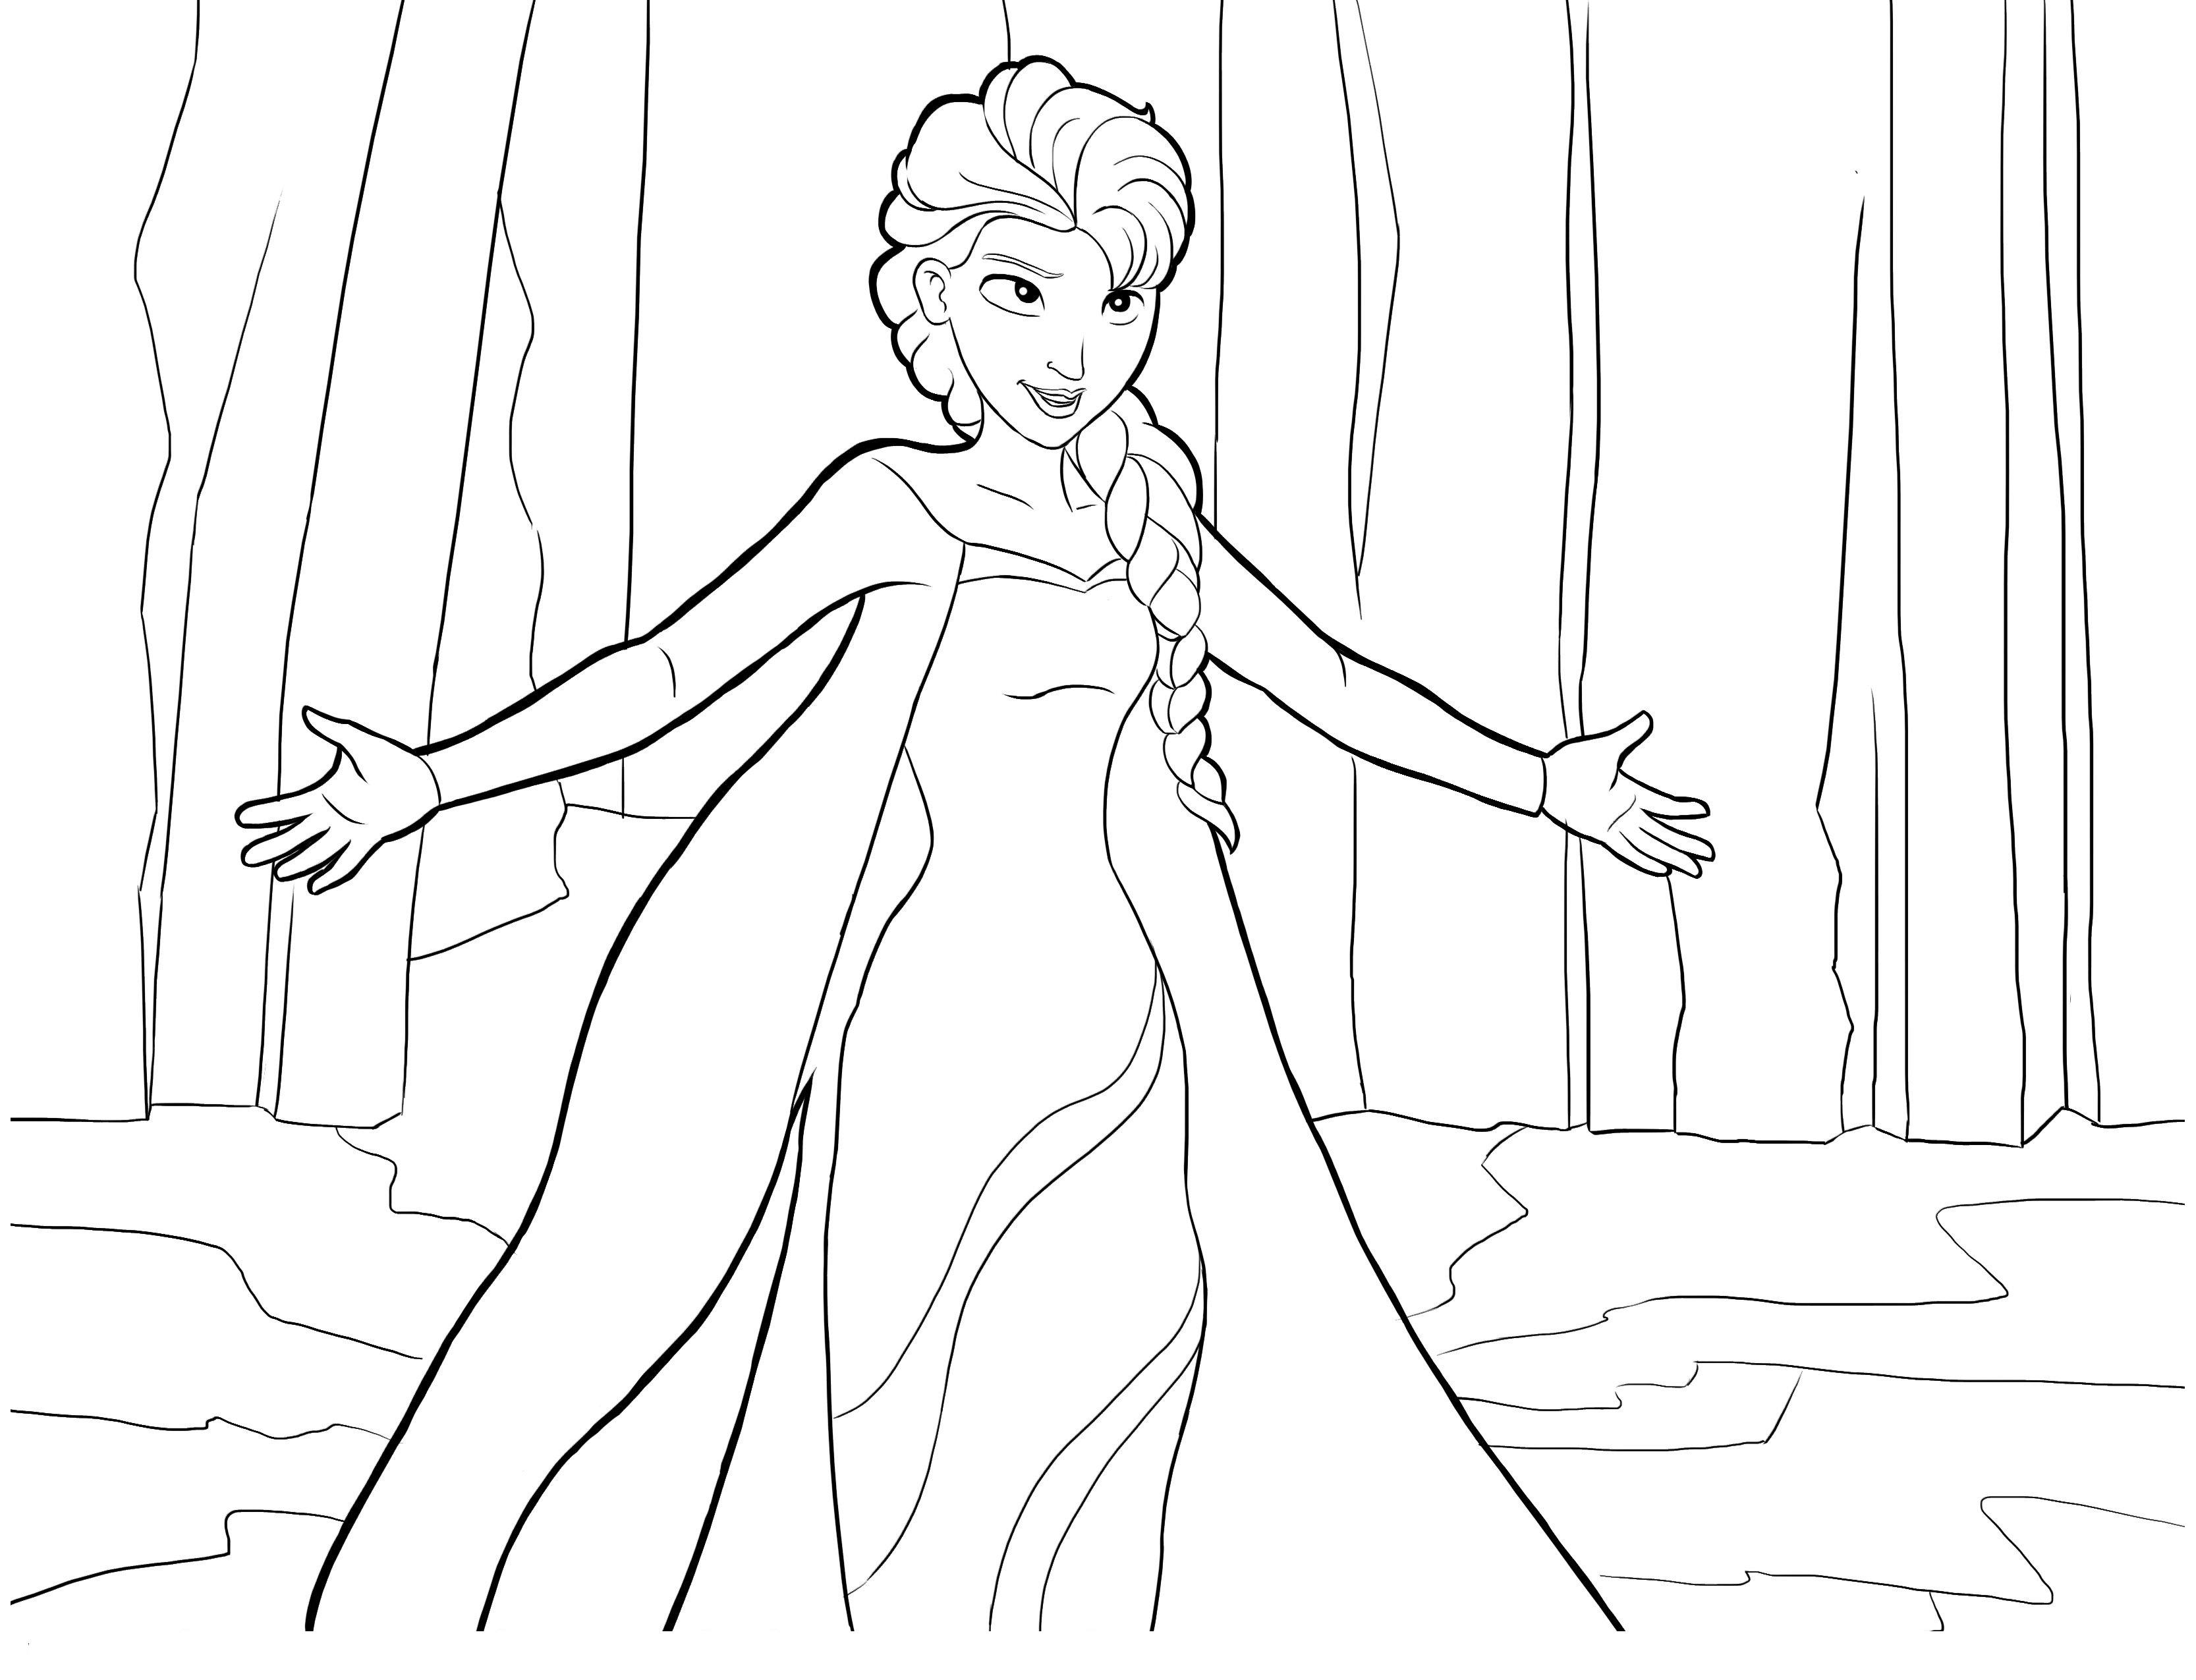 Cute free Frozen coloring page to download : Beautiful Elsa